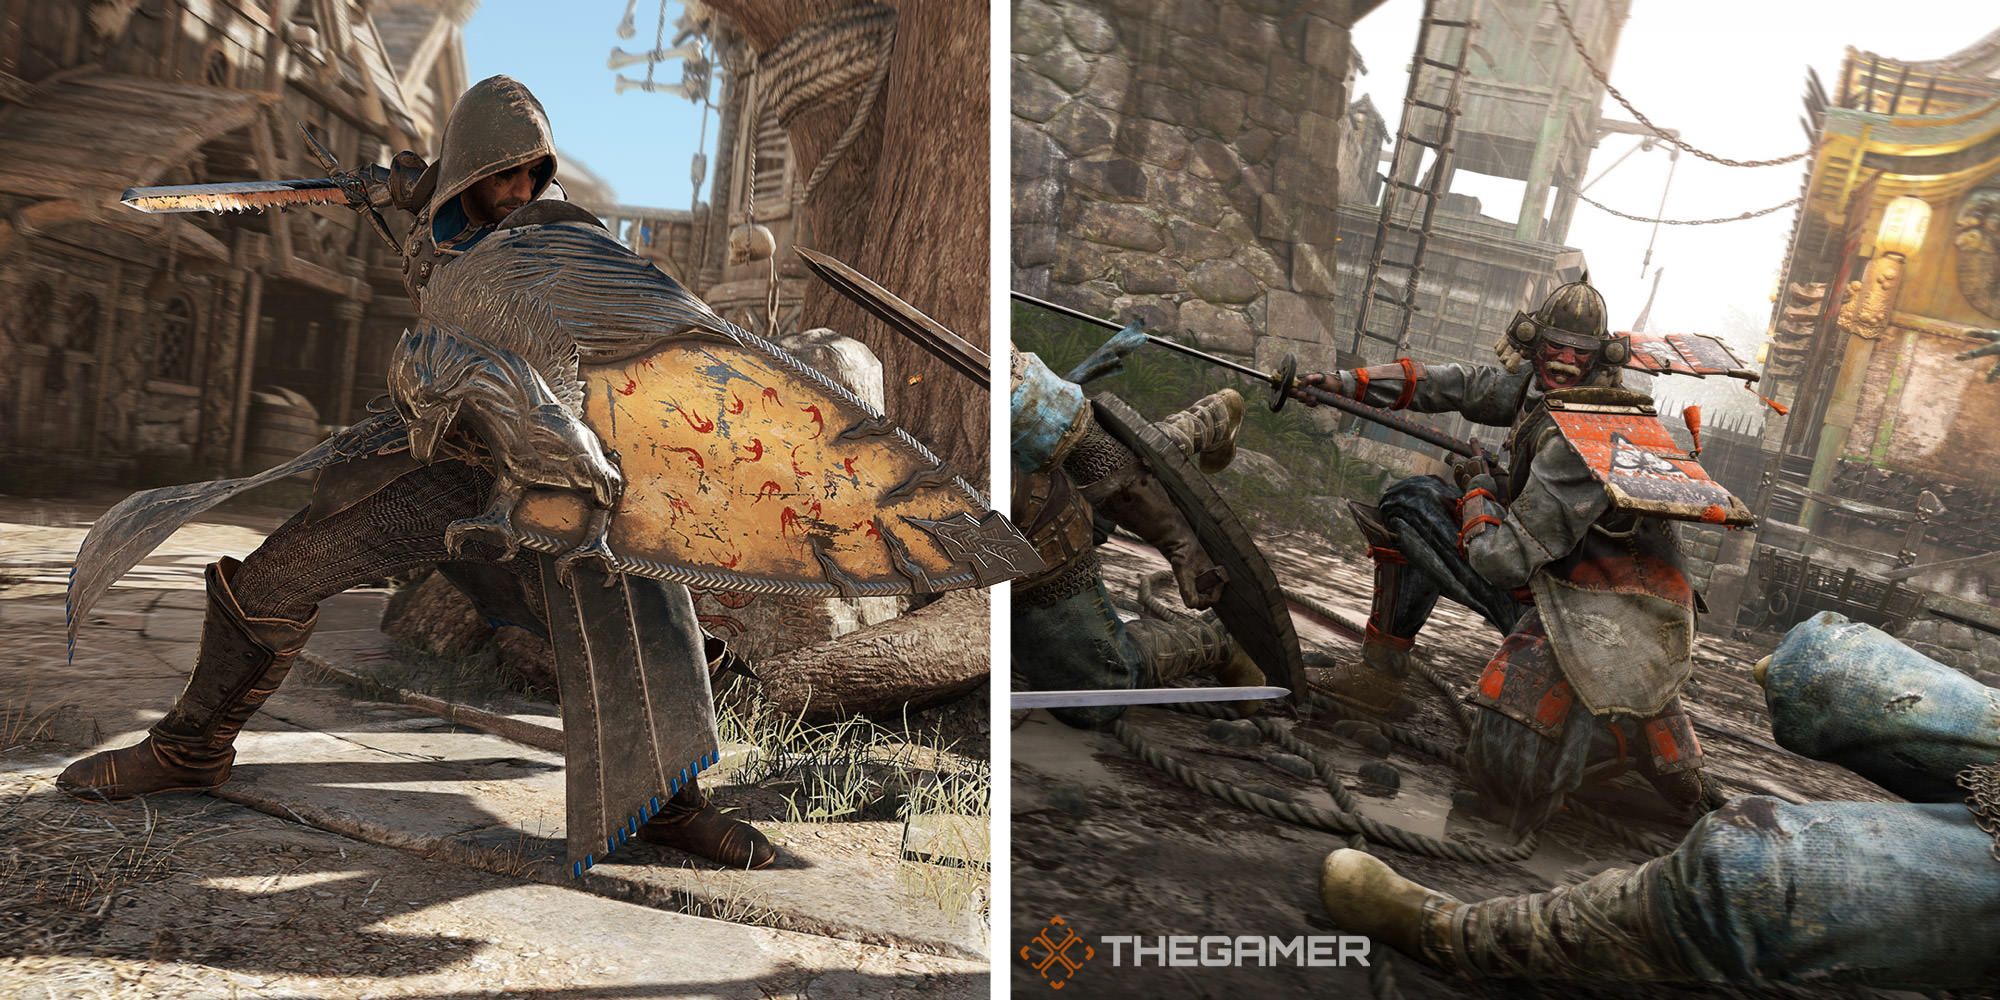 A split image of two warriors from For Honor